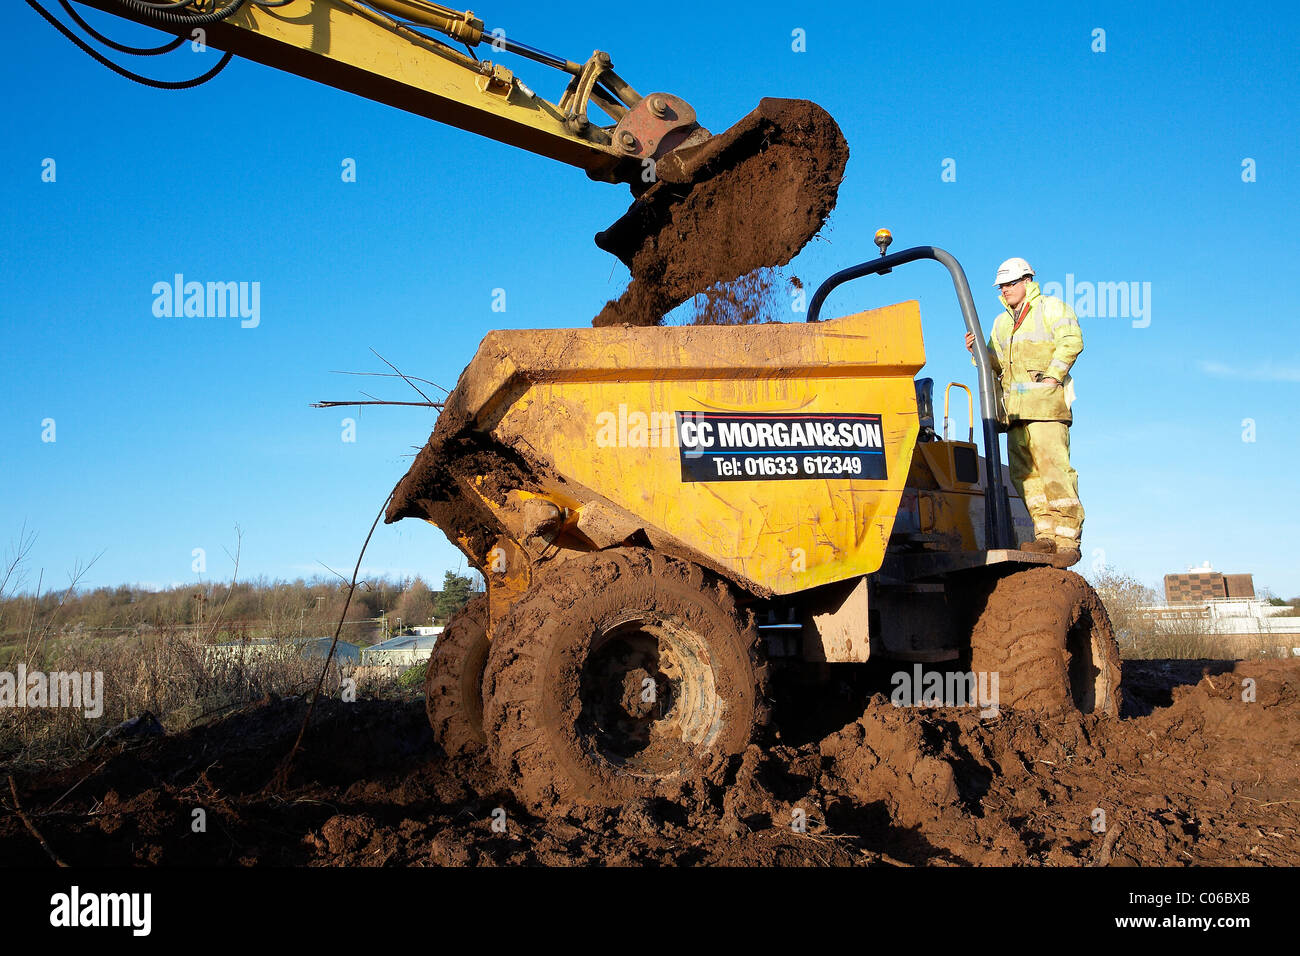 Dump truck getting filled full of earth Stock Photo